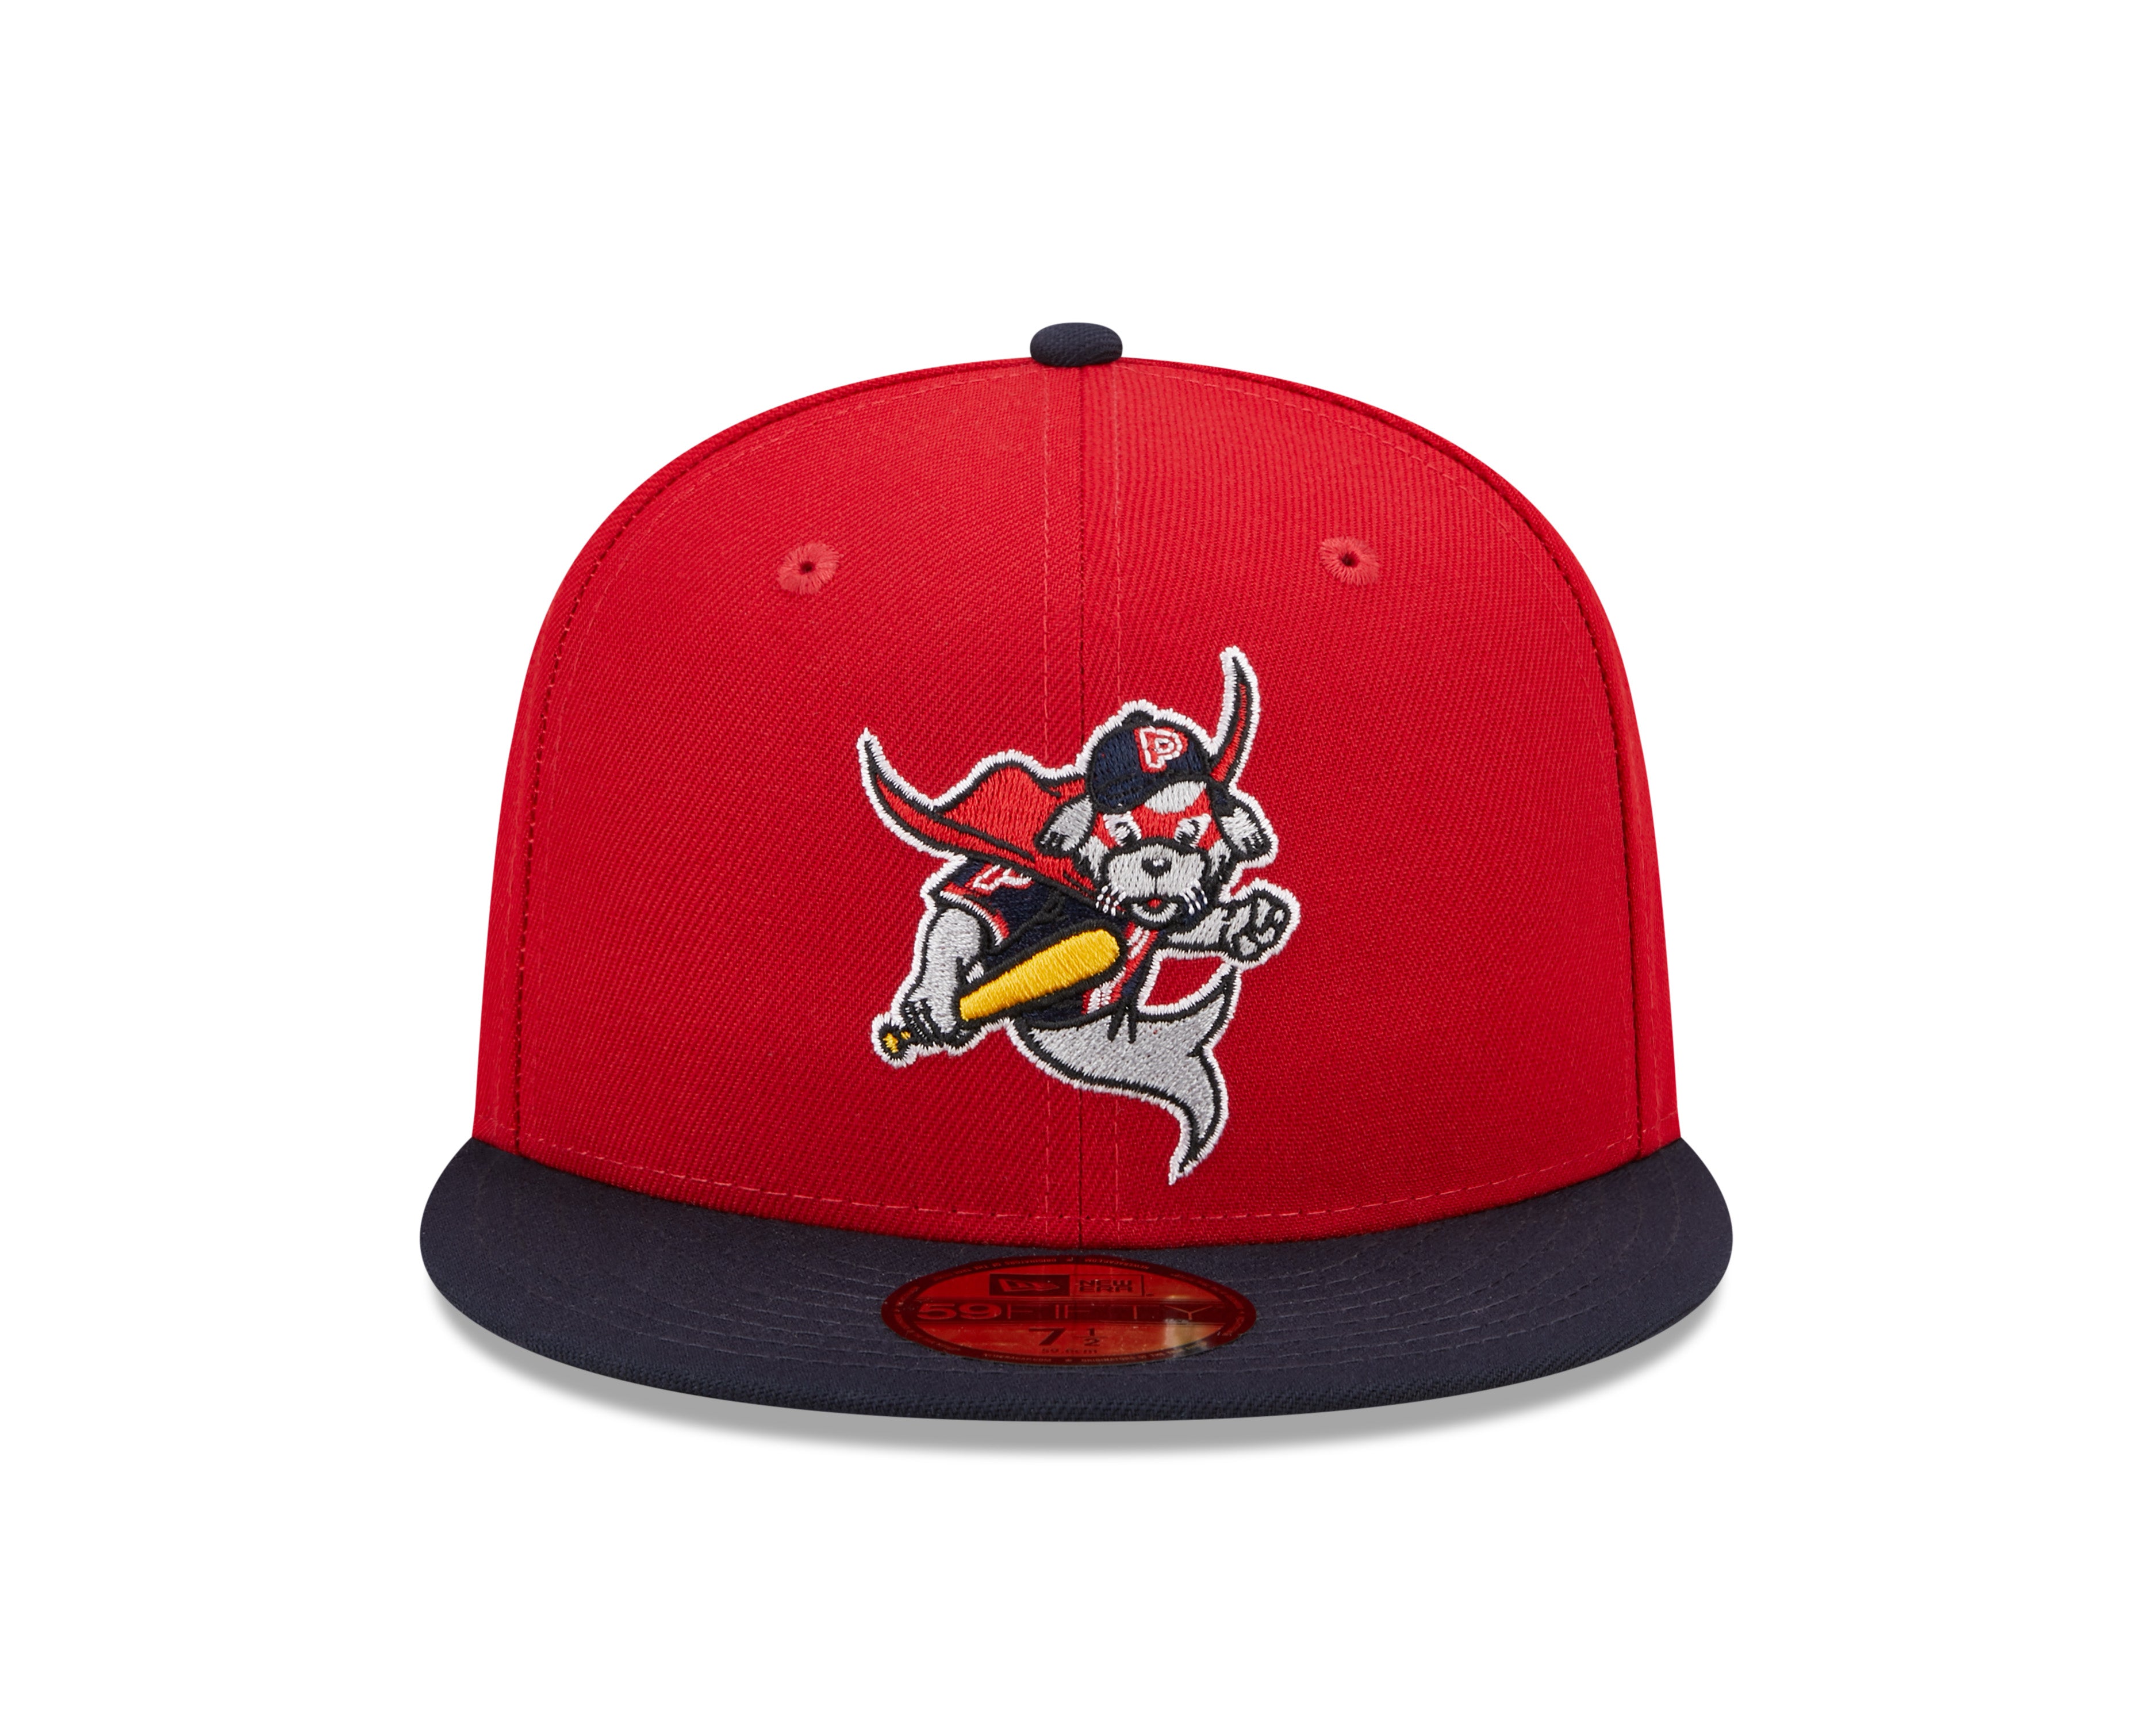 Marvel's Defenders of the Diamond 59Fifty Fitted Hat – Portland